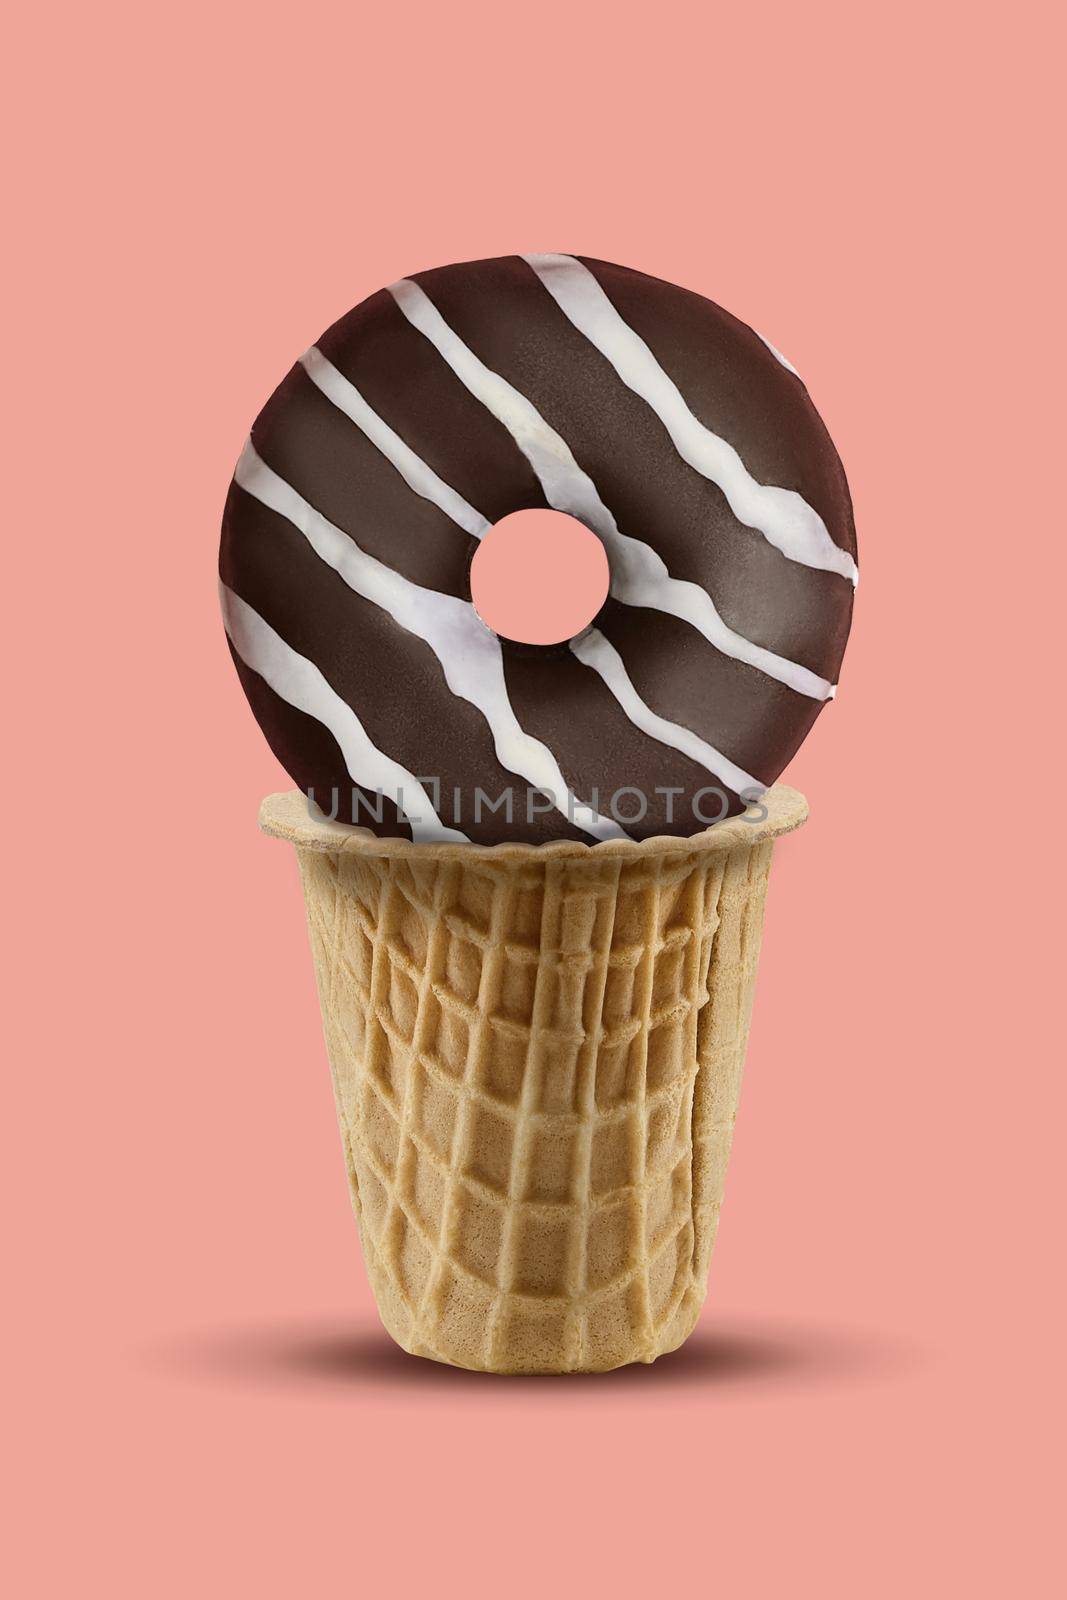 Delicious chocolate donut with white icing in sweet wafer cup against pink background. Concept of food, treats and unhealthy nutrition. Close up, copy space